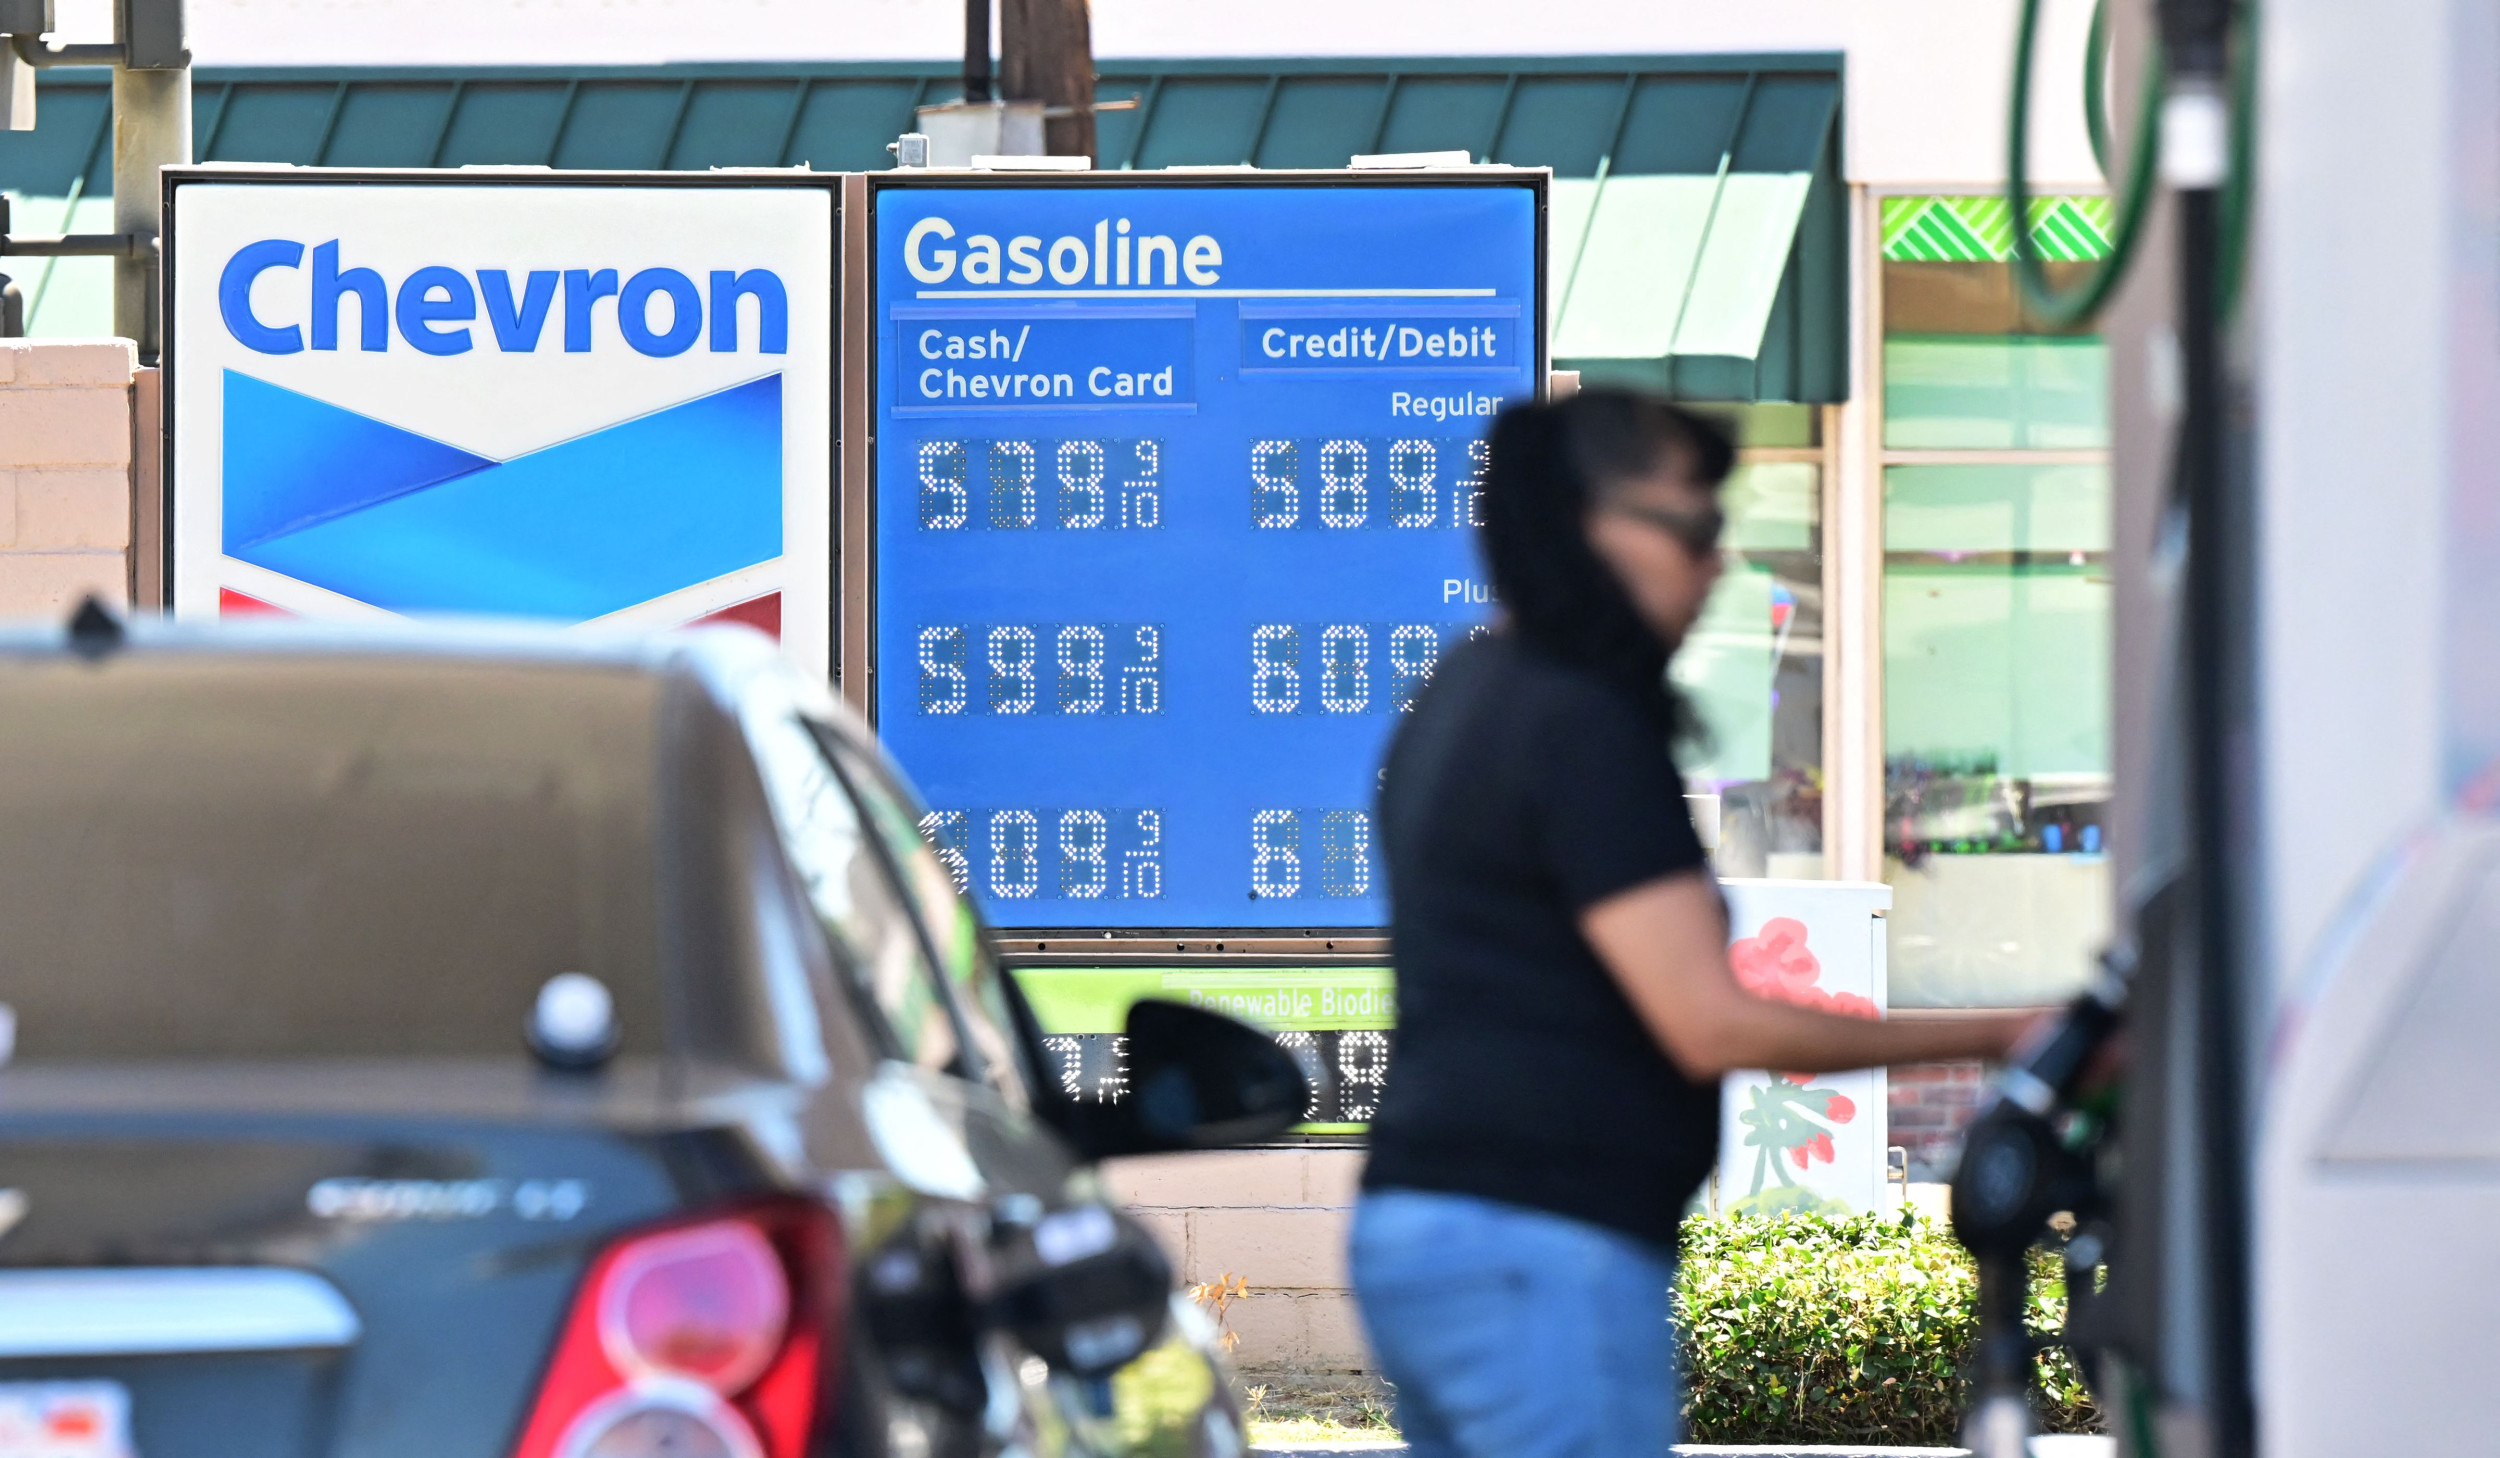 Massive $7 Increase in Gasoline Prices Near the US Border, Here’s What’s Driving the Spike